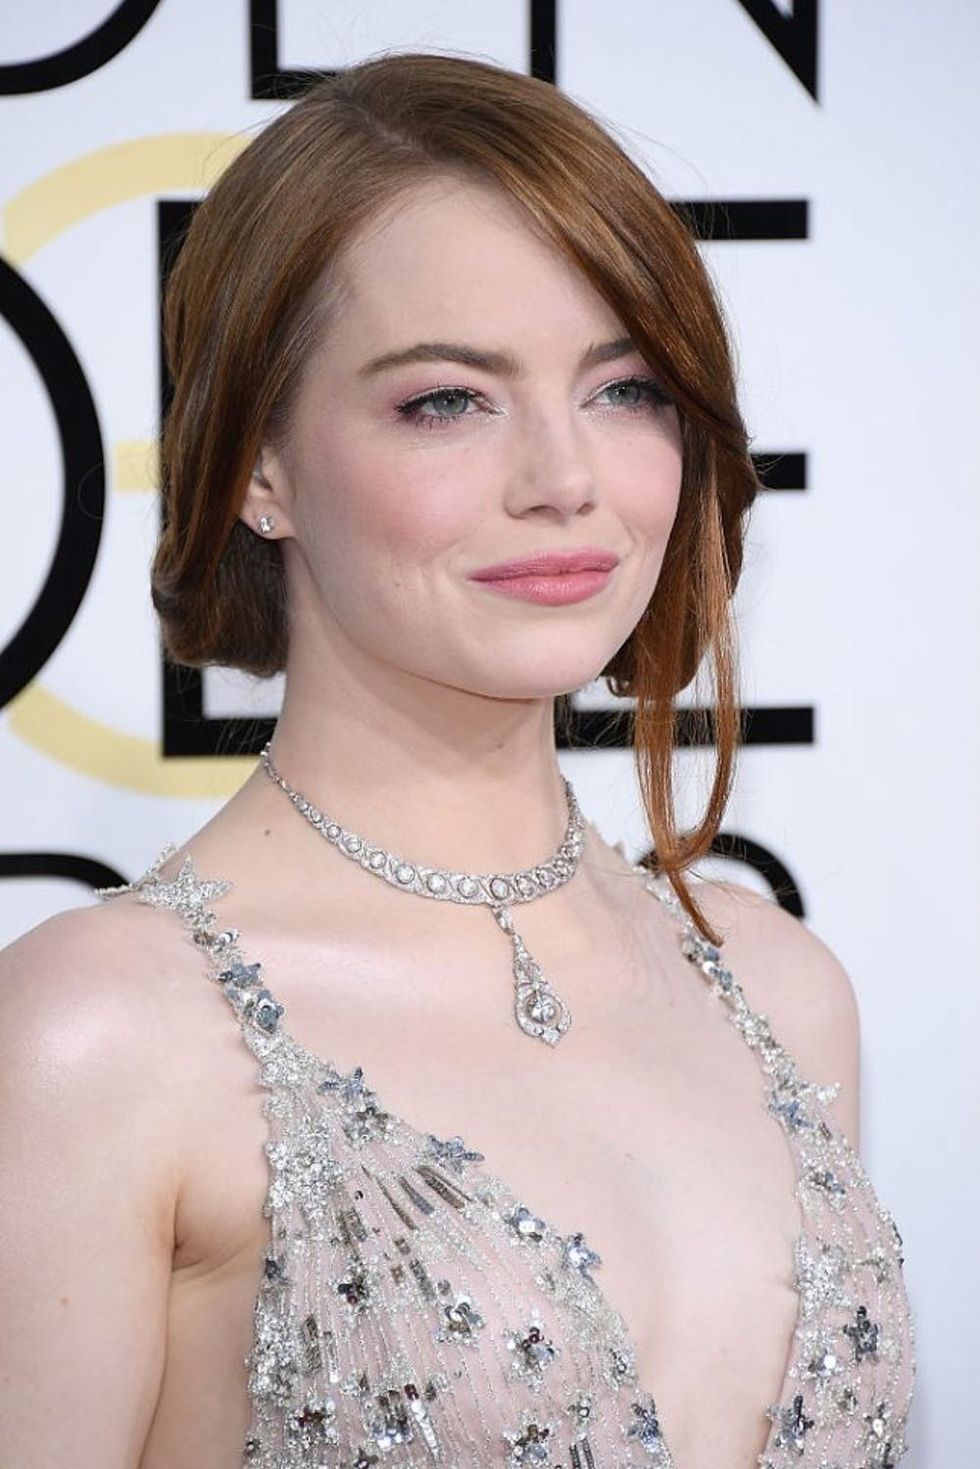 BEVERLY HILLS, CA - JANUARY 08: Emma Stone attends the 74th Annual Golden Globe Awards at The Beverly Hilton Hotel on January 8, 2017 in Beverly Hills, California. (Photo by Venturelli/WireImage)